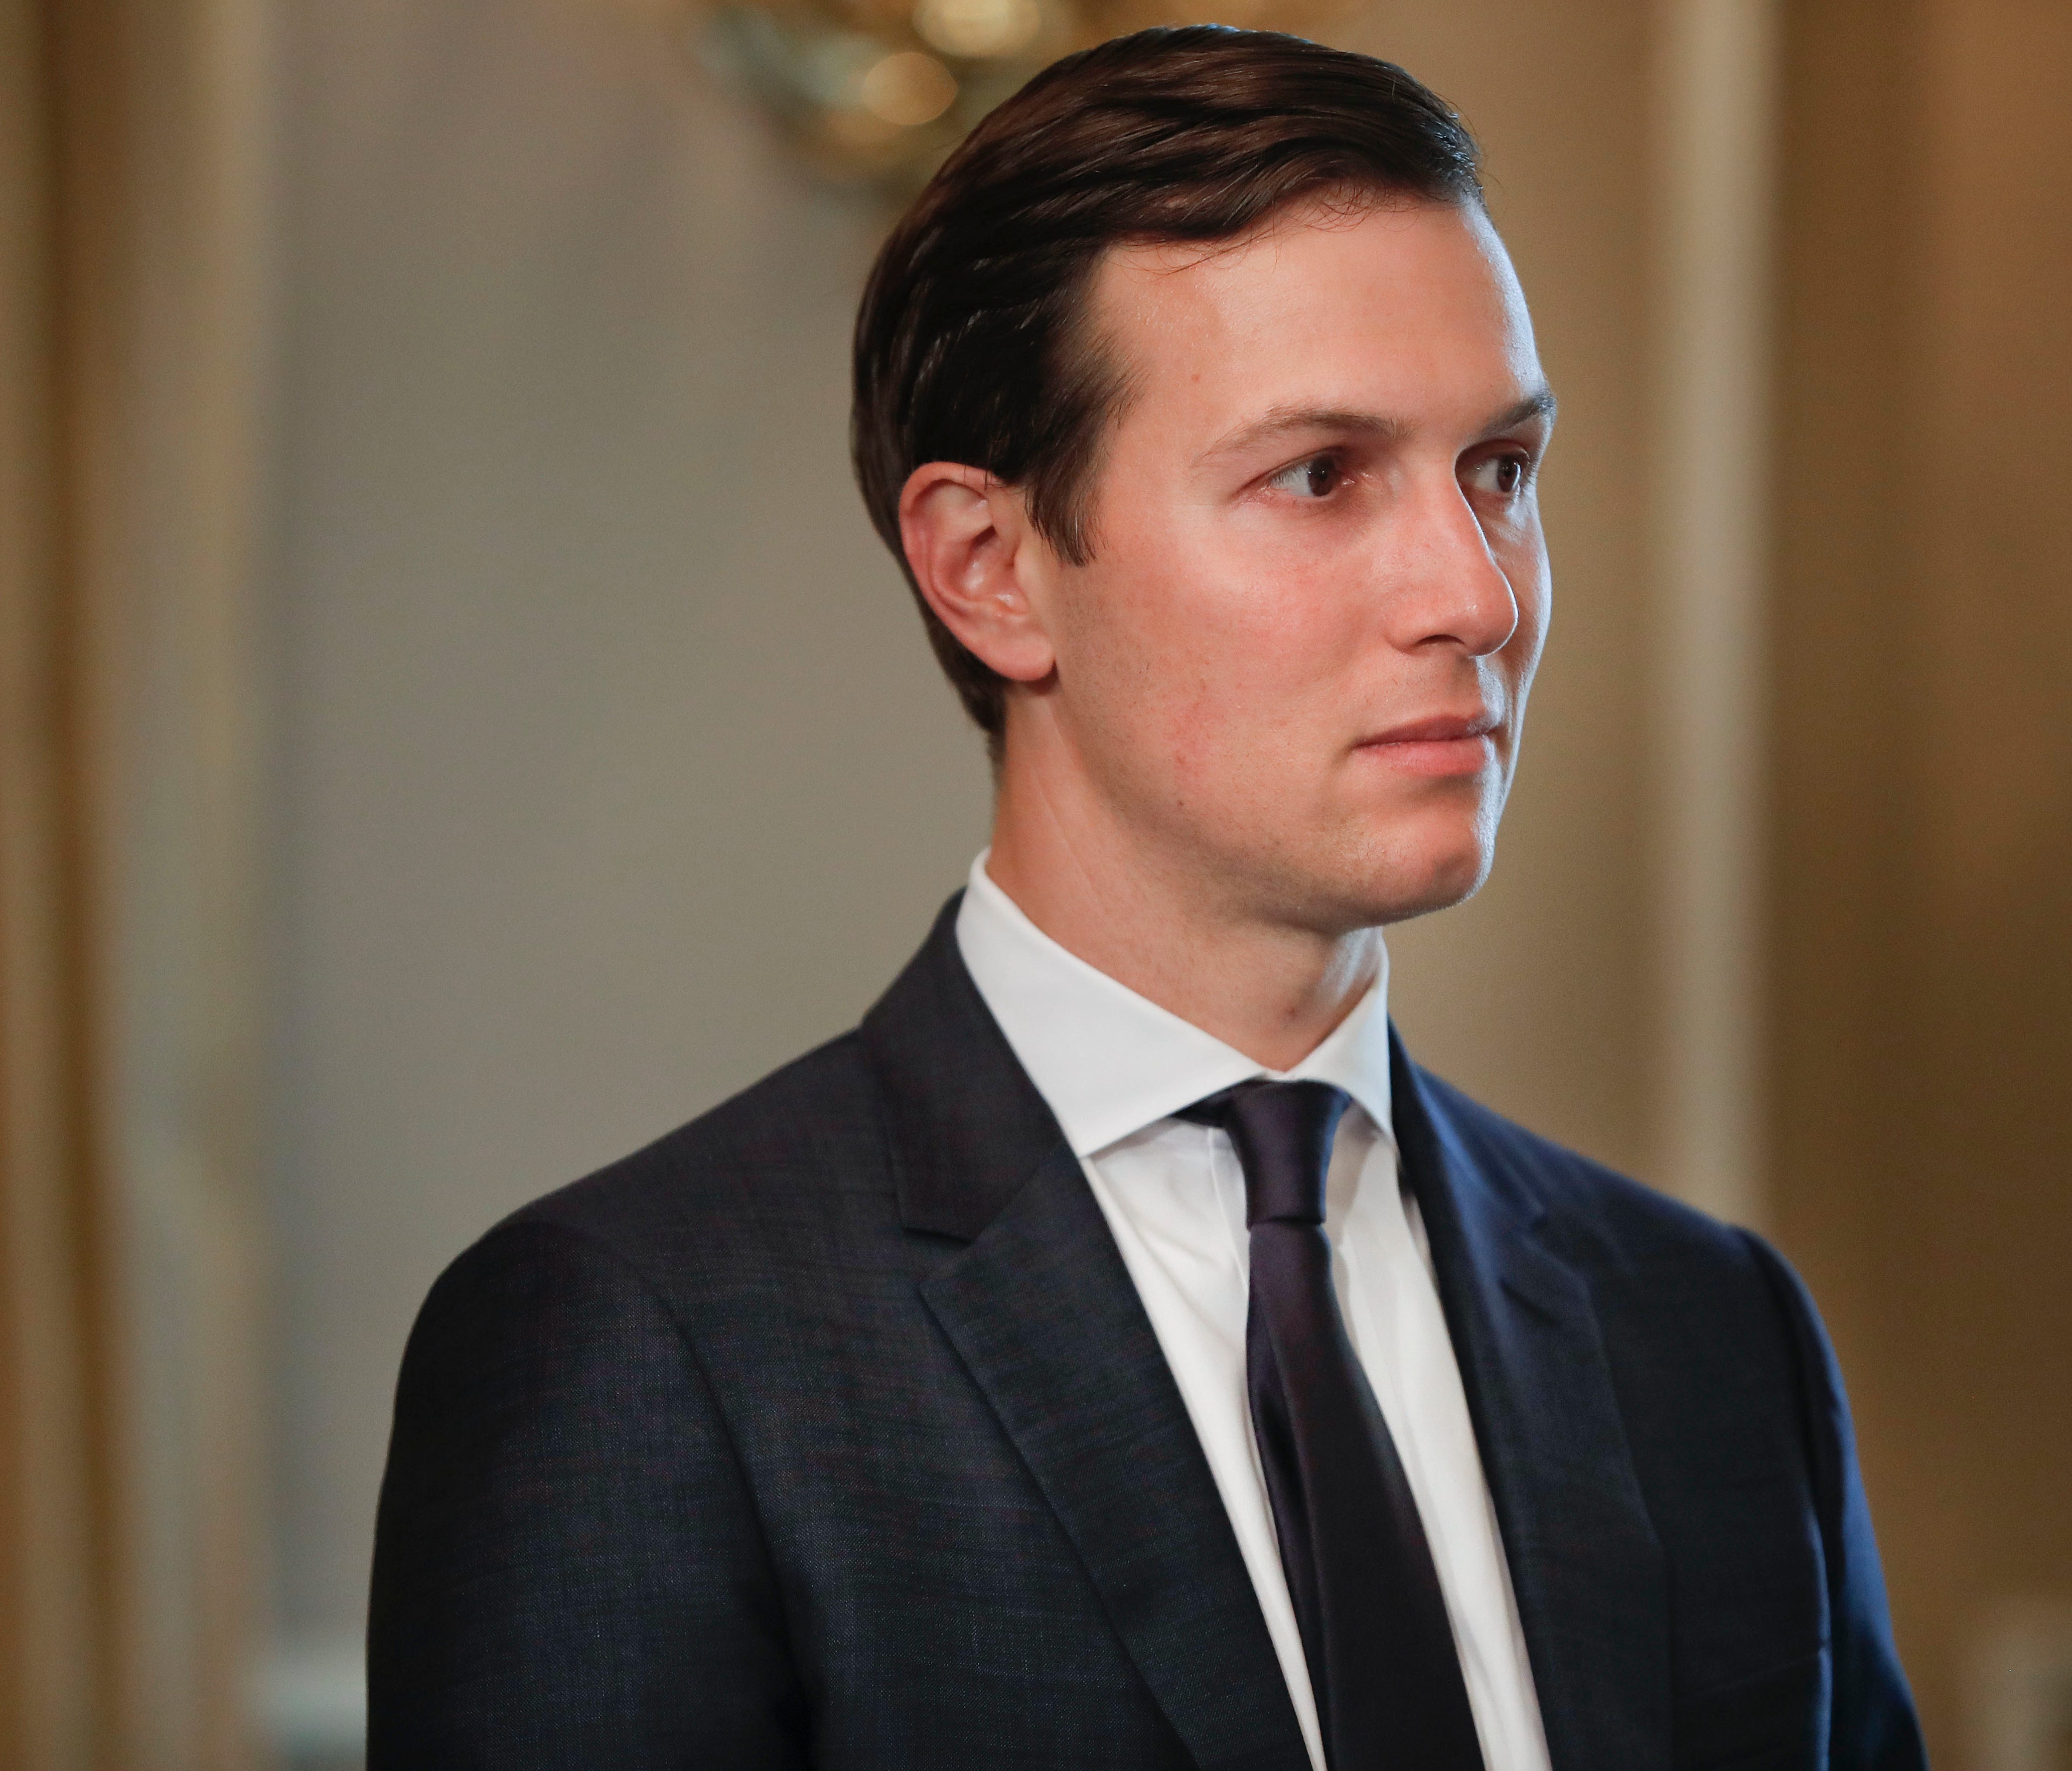 White House senior adviser Jared Kushner listens as President Trump answers questions regarding the ongoing situation in North Korea, Friday, Aug. 11, 2017, at Trump National Golf Club in Bedminster, N.J.